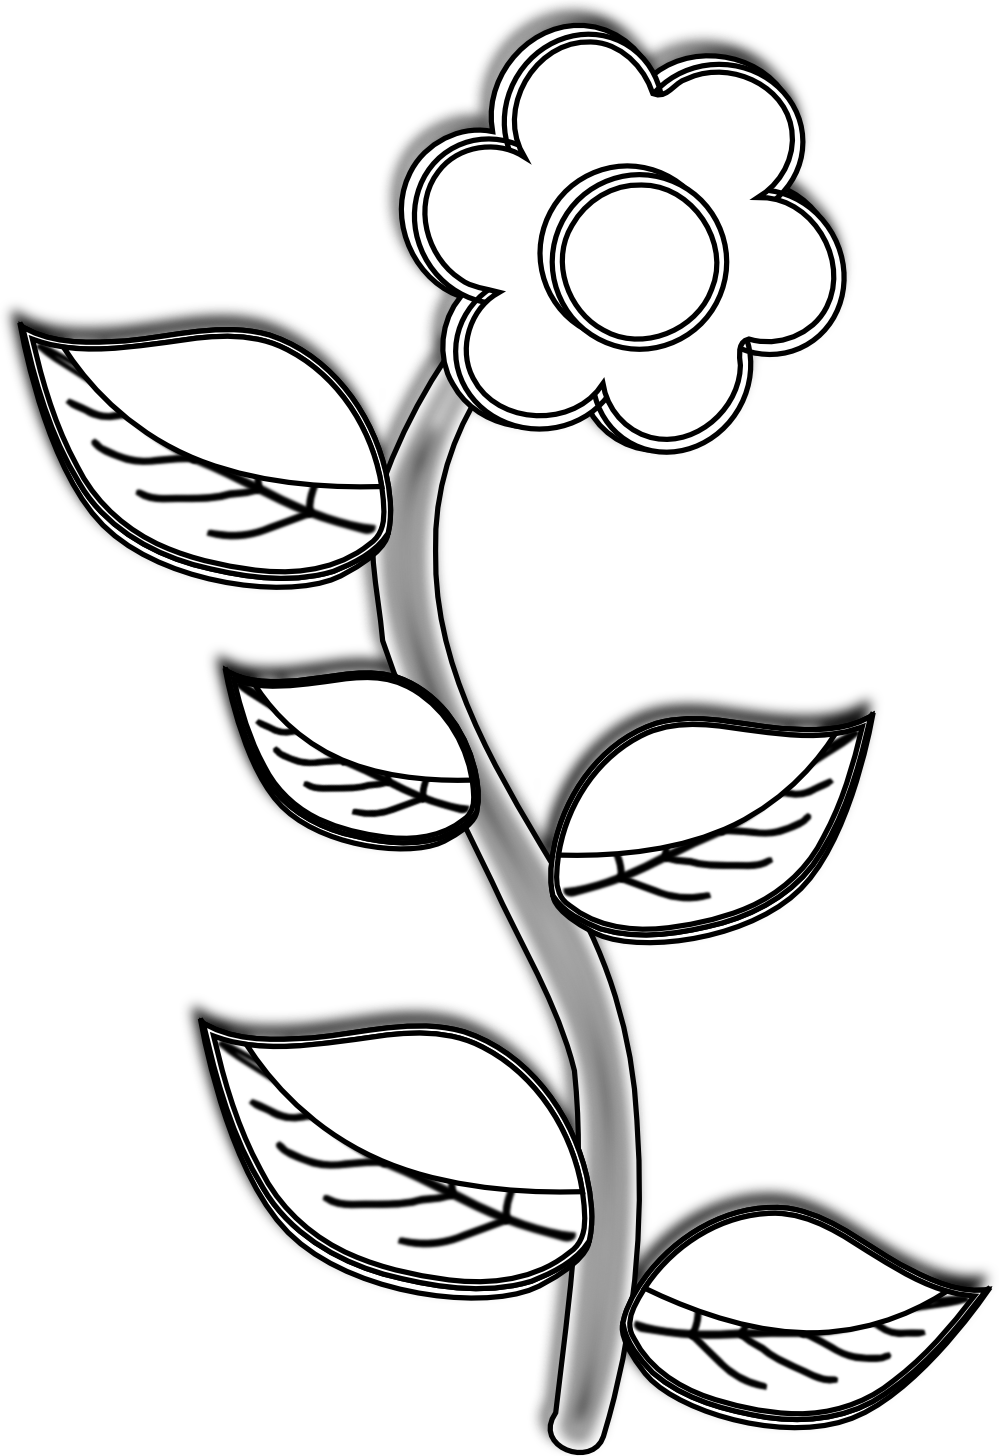 Flowers For > Flower Drawings In Black And White